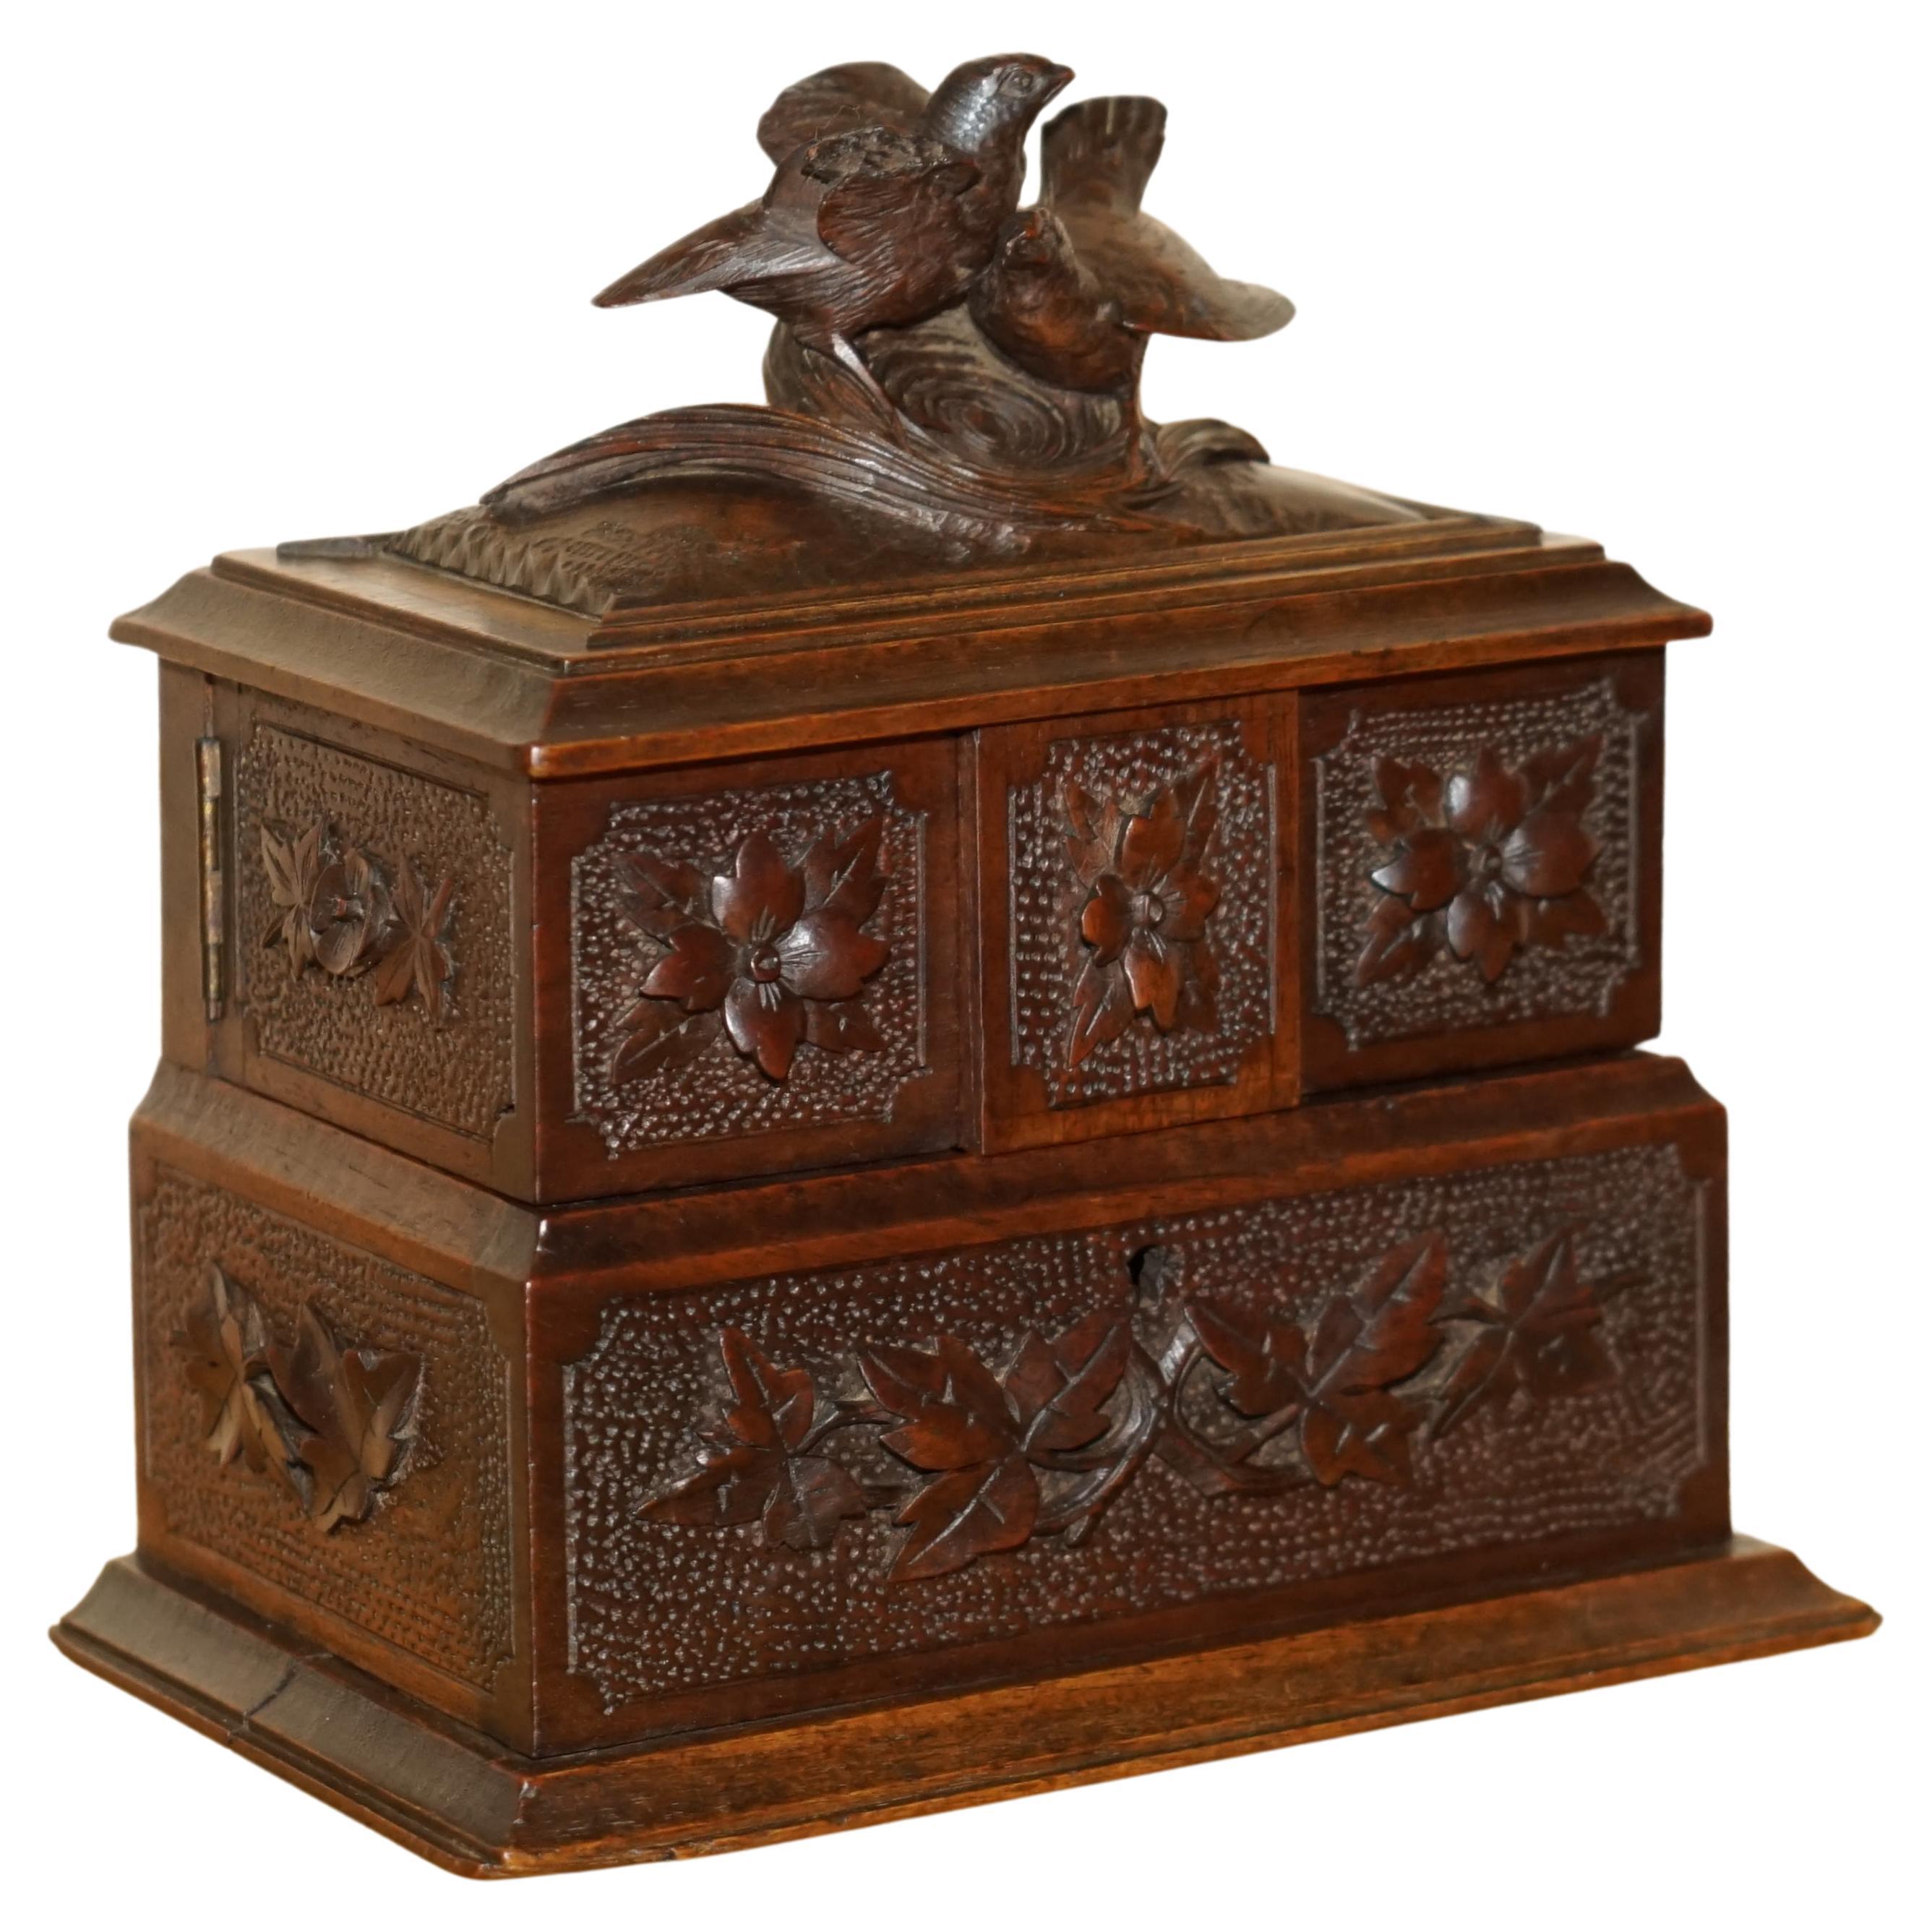 Stunning Original Antique Hand Carved Black Forest Wood Jewellery Box